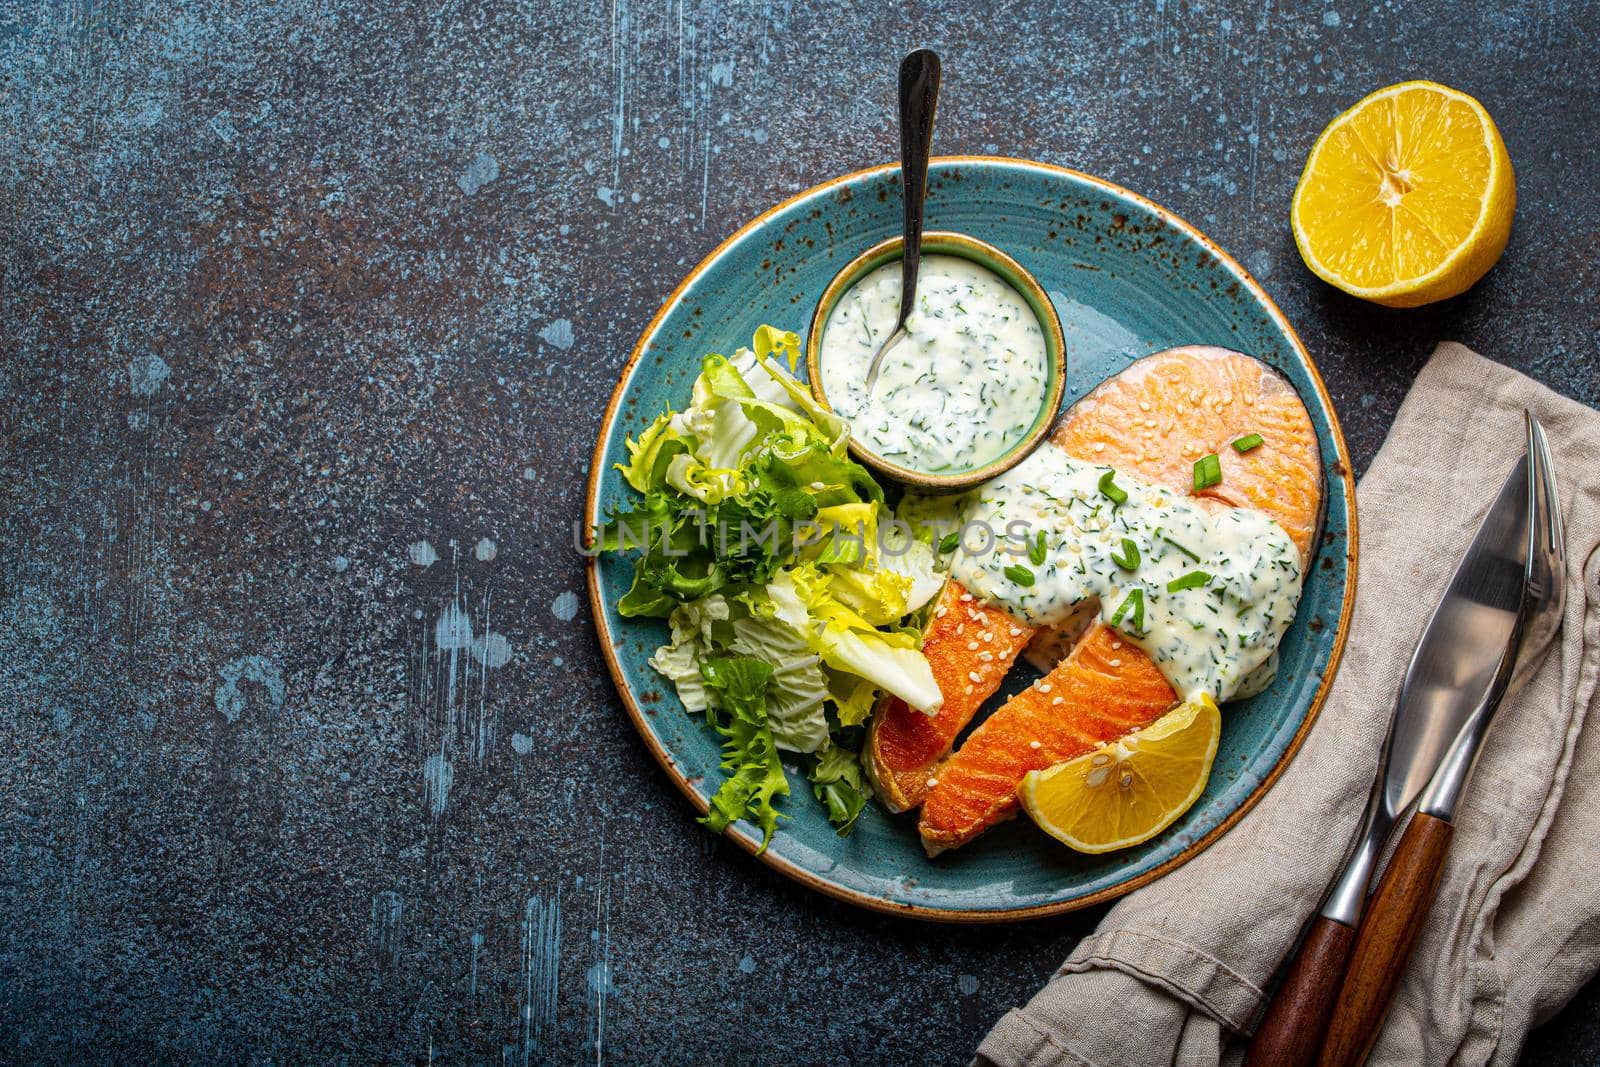 Healthy food meal cooked grilled salmon steaks with white dill sauce and salad leafs on plate on rustic concrete stone background table flat lay from above, diet healthy nutrition dinner copy space